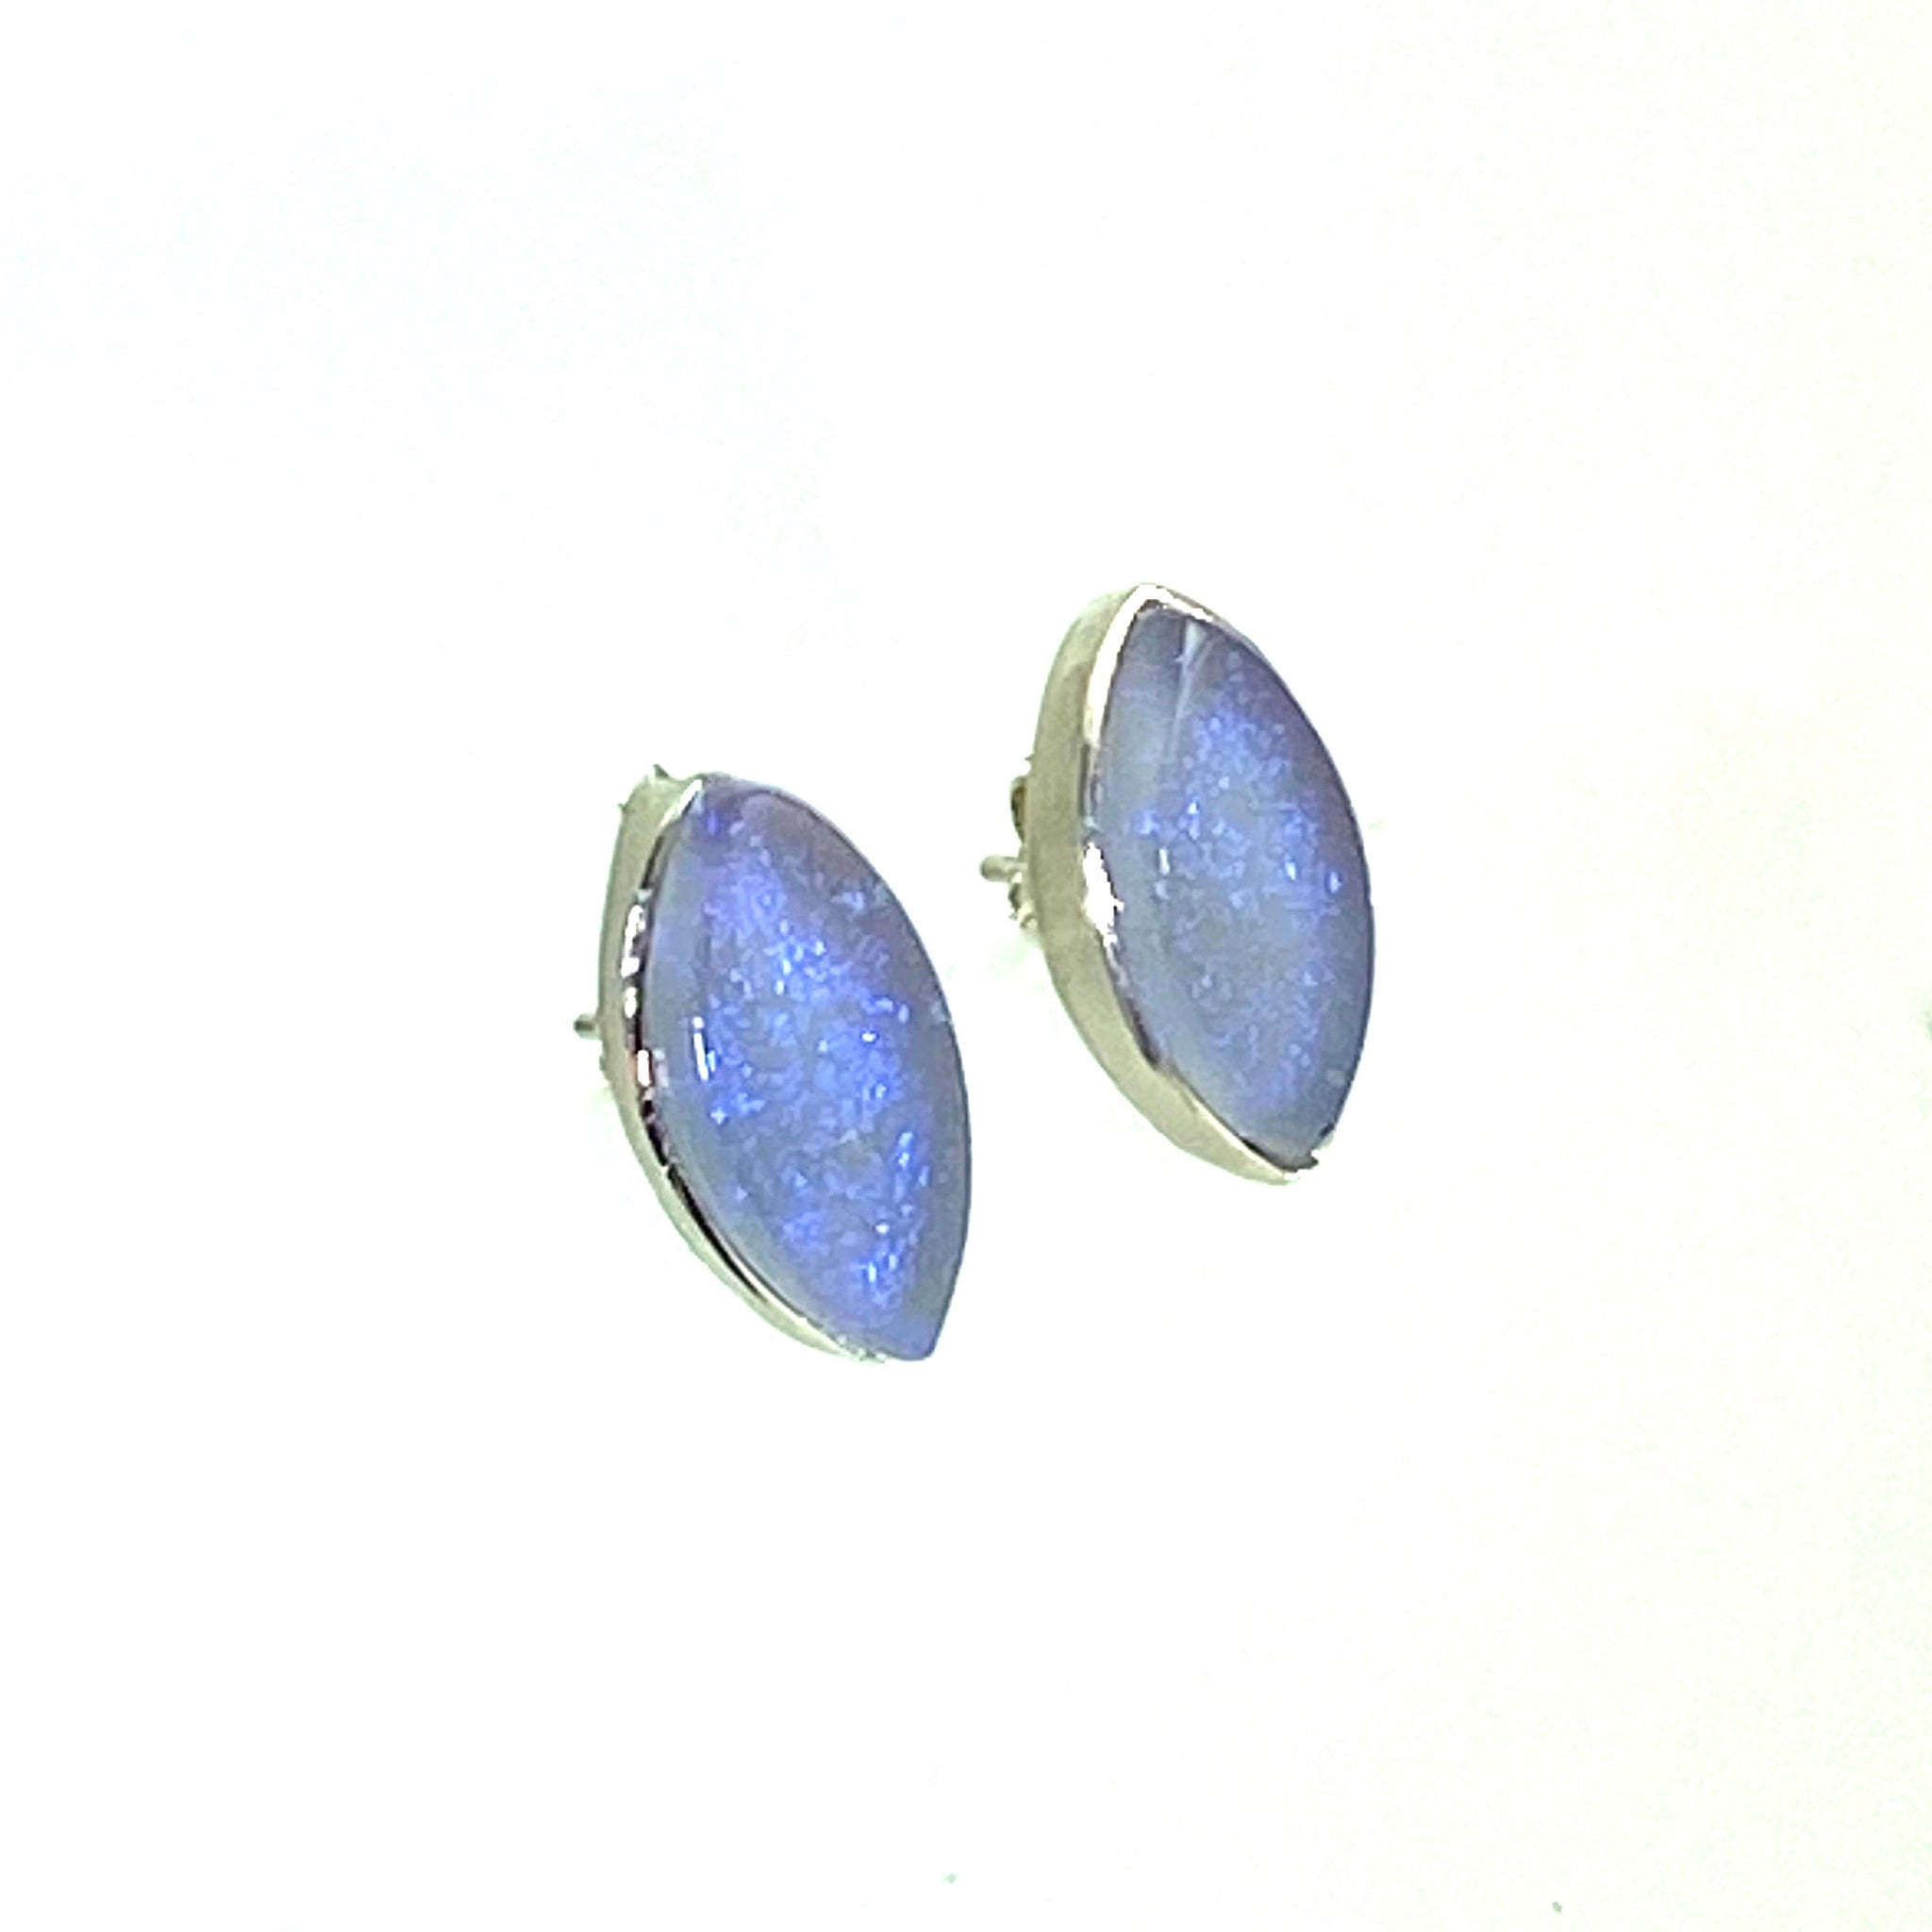 lavender, marquise post earrings, fused glass, glass jewelry, glass and silver jewelry, handmade, handcrafted, American Craft, hand fabricated jewelry, hand fabricated jewellery,  Athen, Georgia, colorful jewelry, sparkle, bullseye glass, dichroic glass 